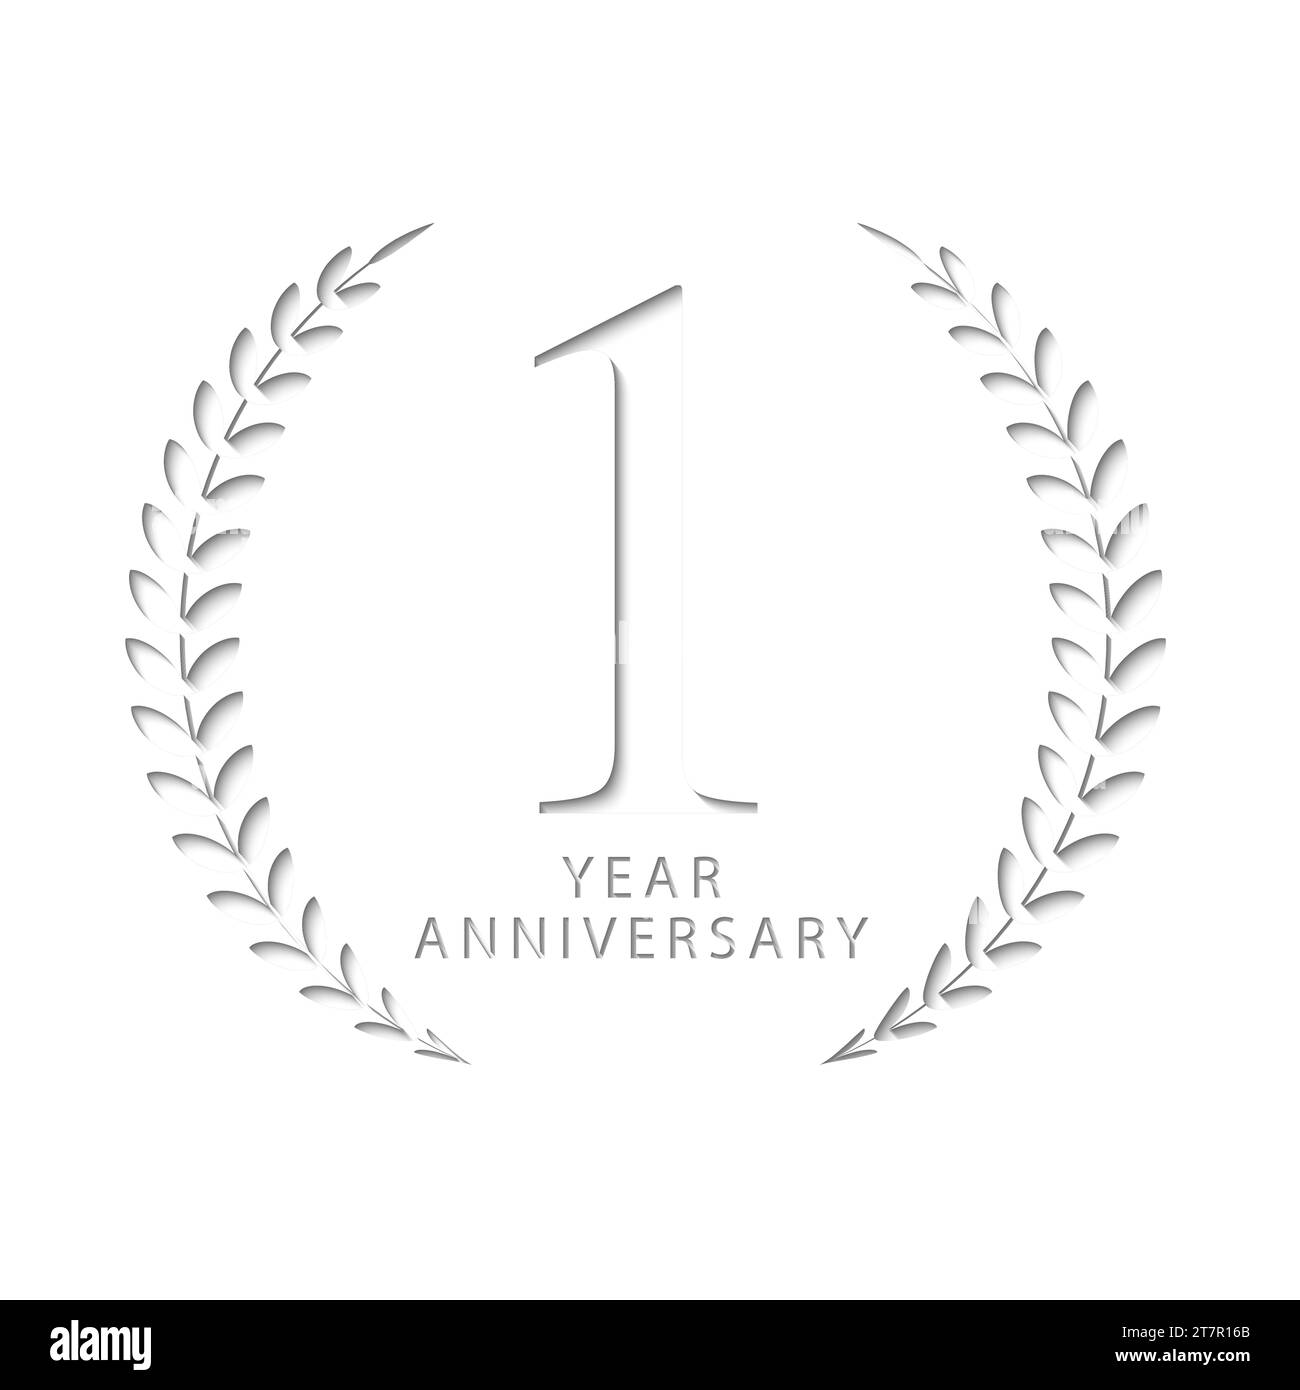 Paper cut design of 1 year anniversary, to represents the name of 1 year anniversary which is paper, vector template Stock Vector